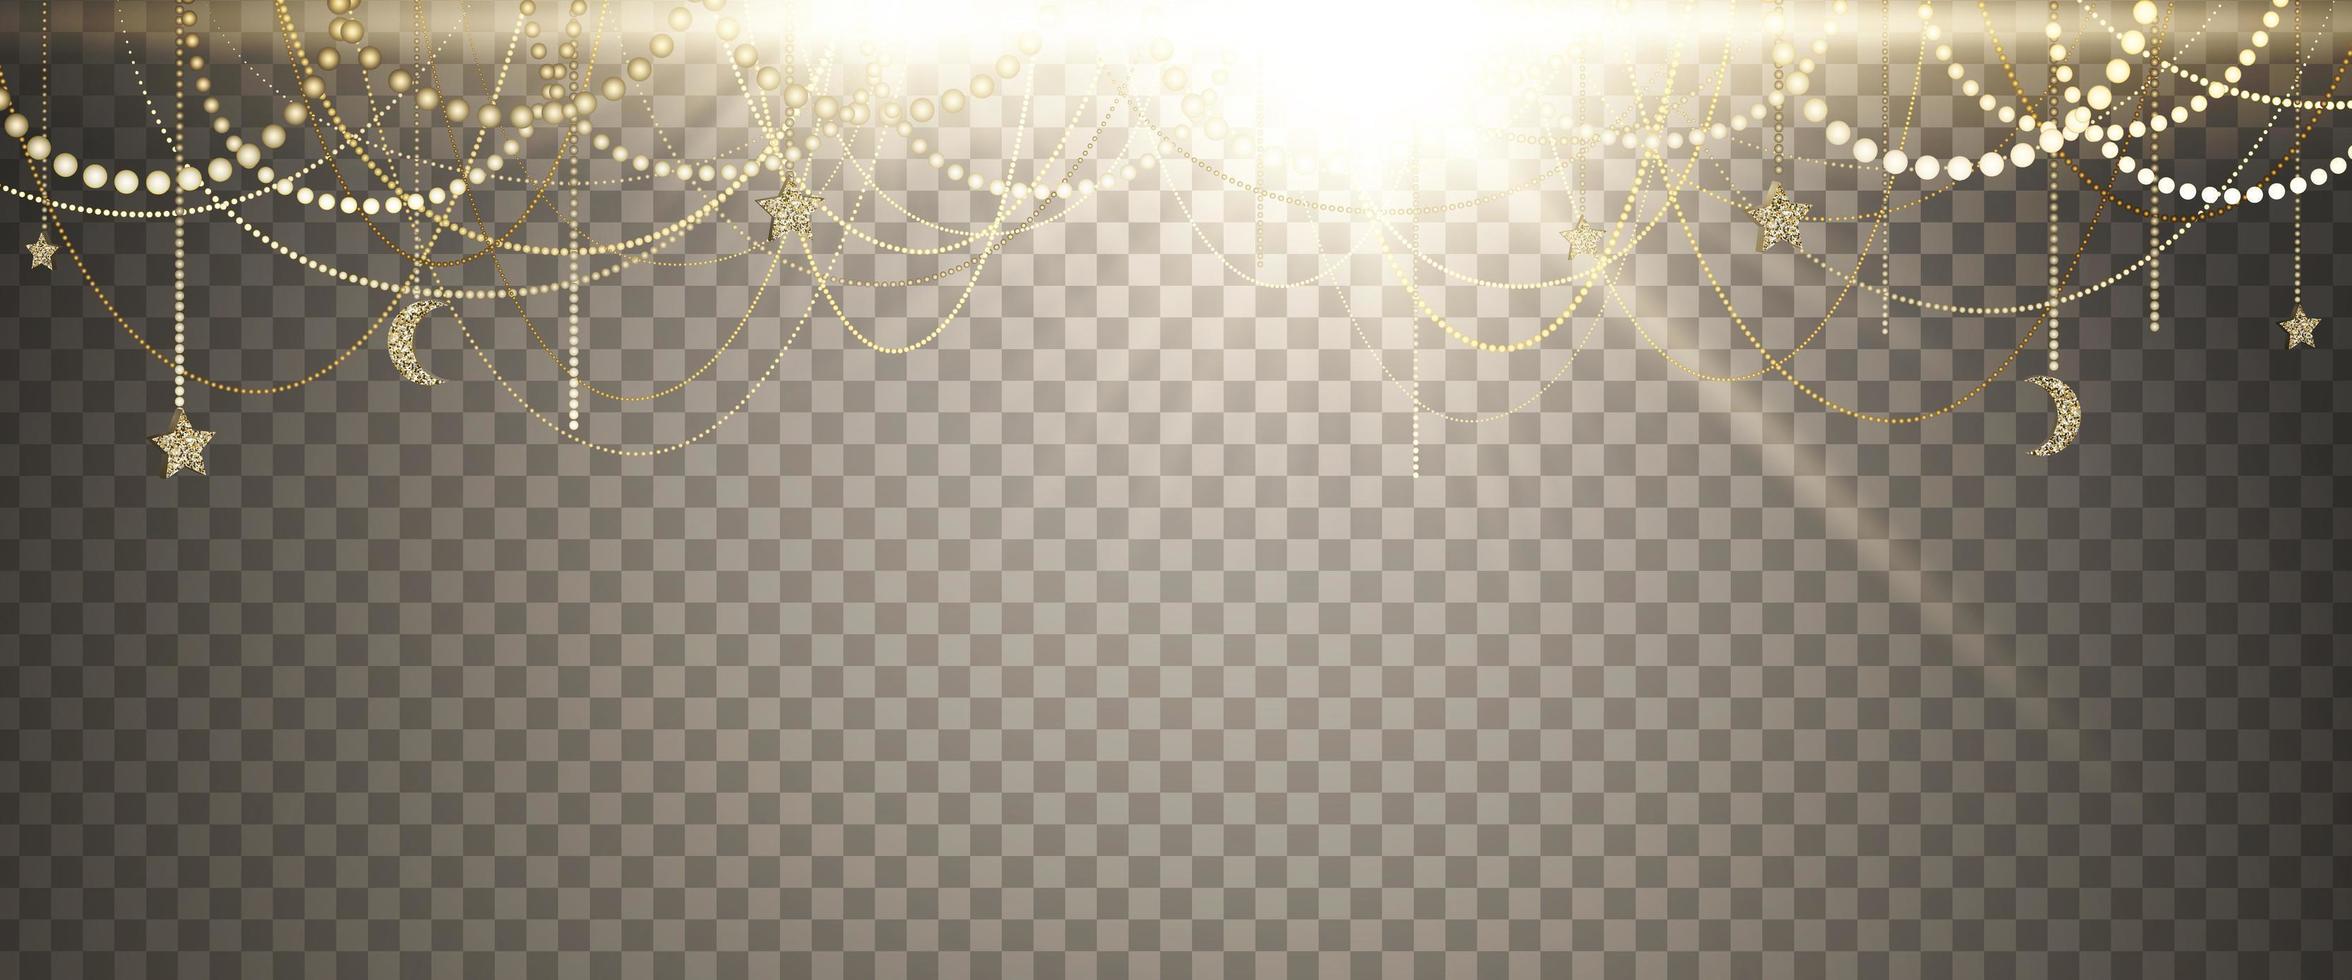 Abstract background with many golden garlands and a big bright flash of light. vector